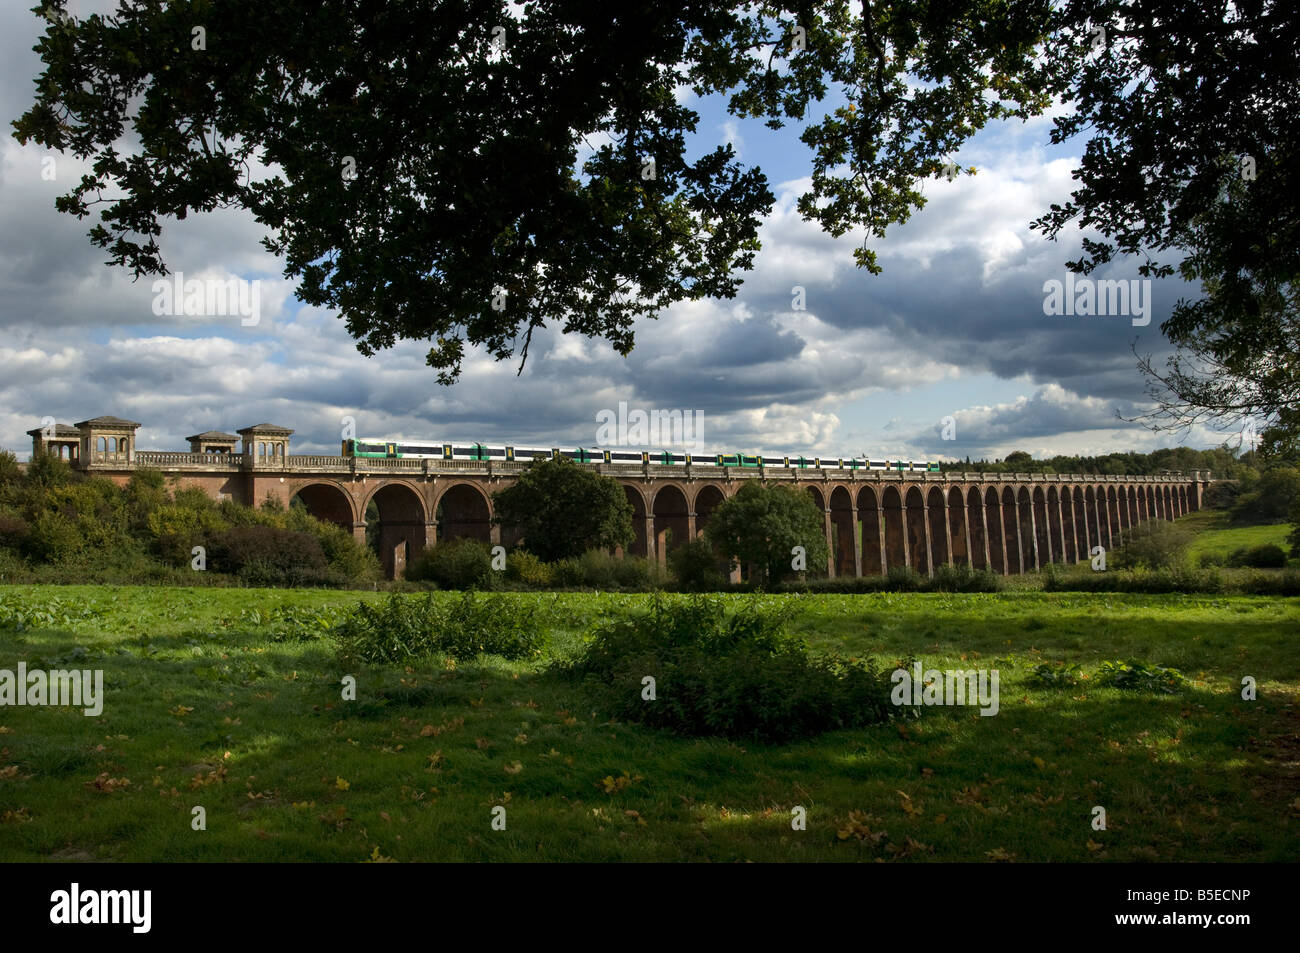 A Southern Railways Brighton to London commuter express train crosses the Ouse Valley Viaduct Balcombe Stock Photo